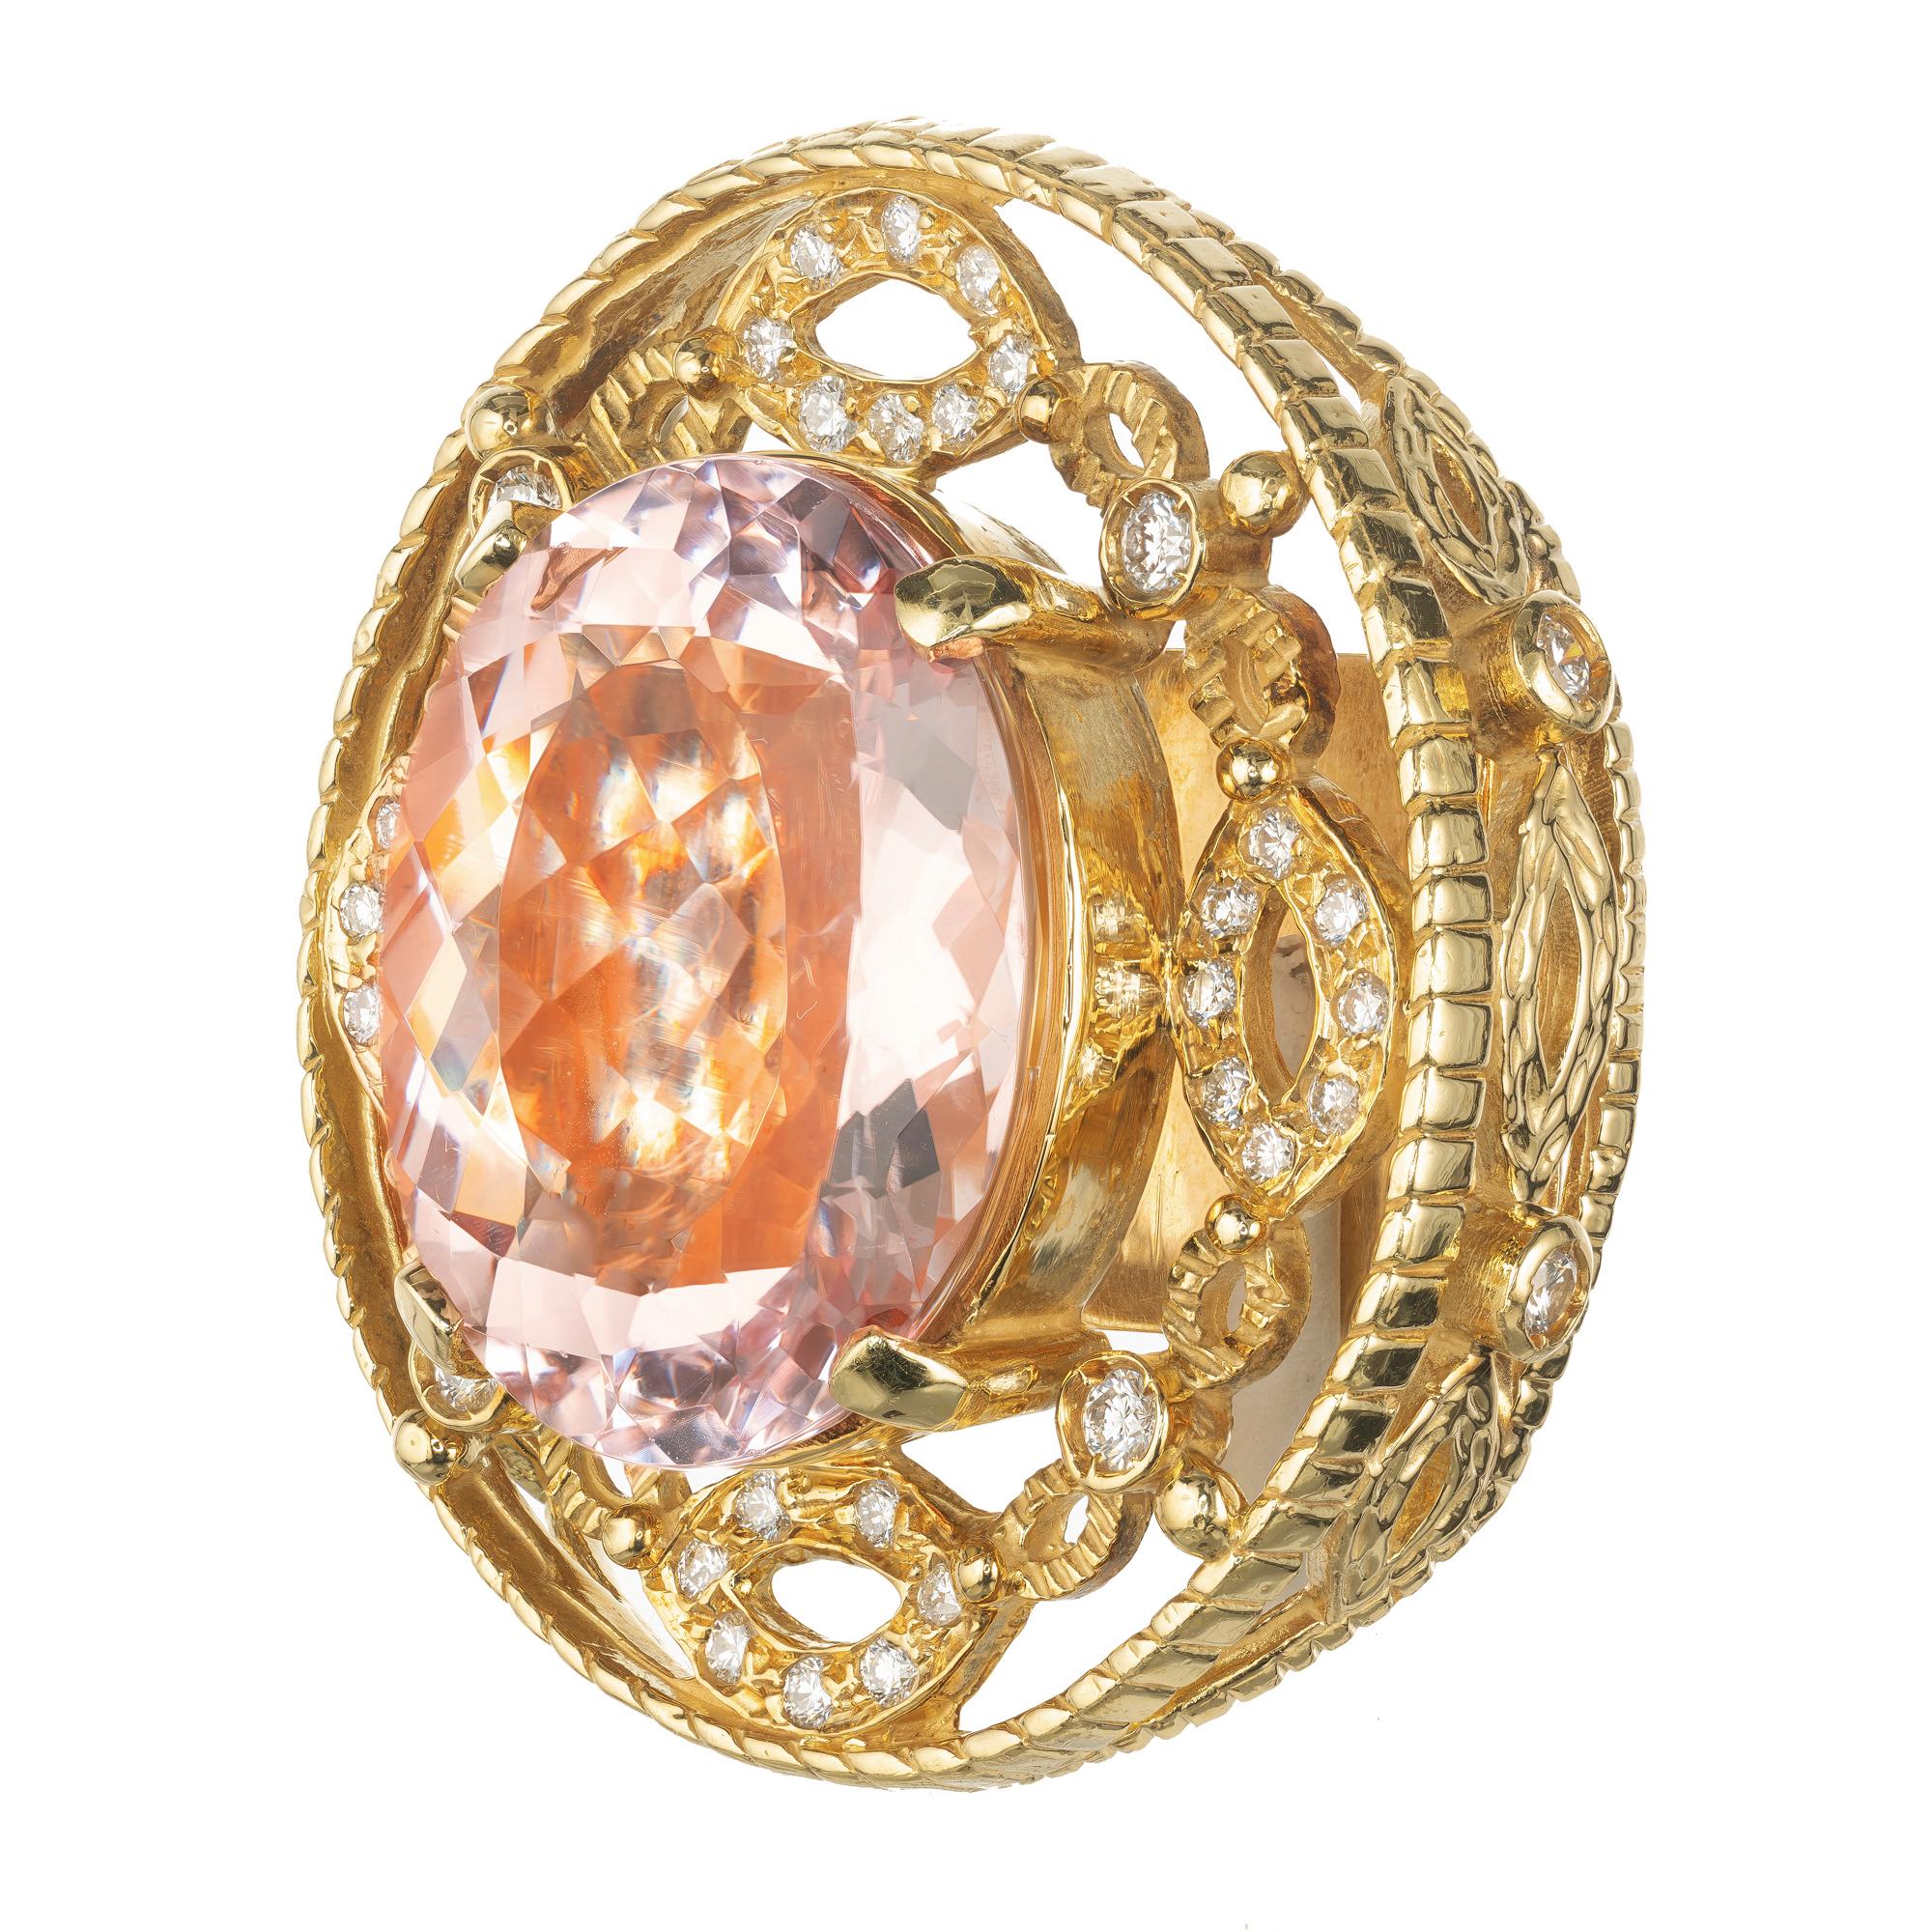 Doris Panos pink morganite and diamond pendant slide. 18k Yellow Gold open work setting with an oval morganite center stone with round accent diamonds in an open work pendant. The back hinges open to fit a flat or round chain or necklace. The